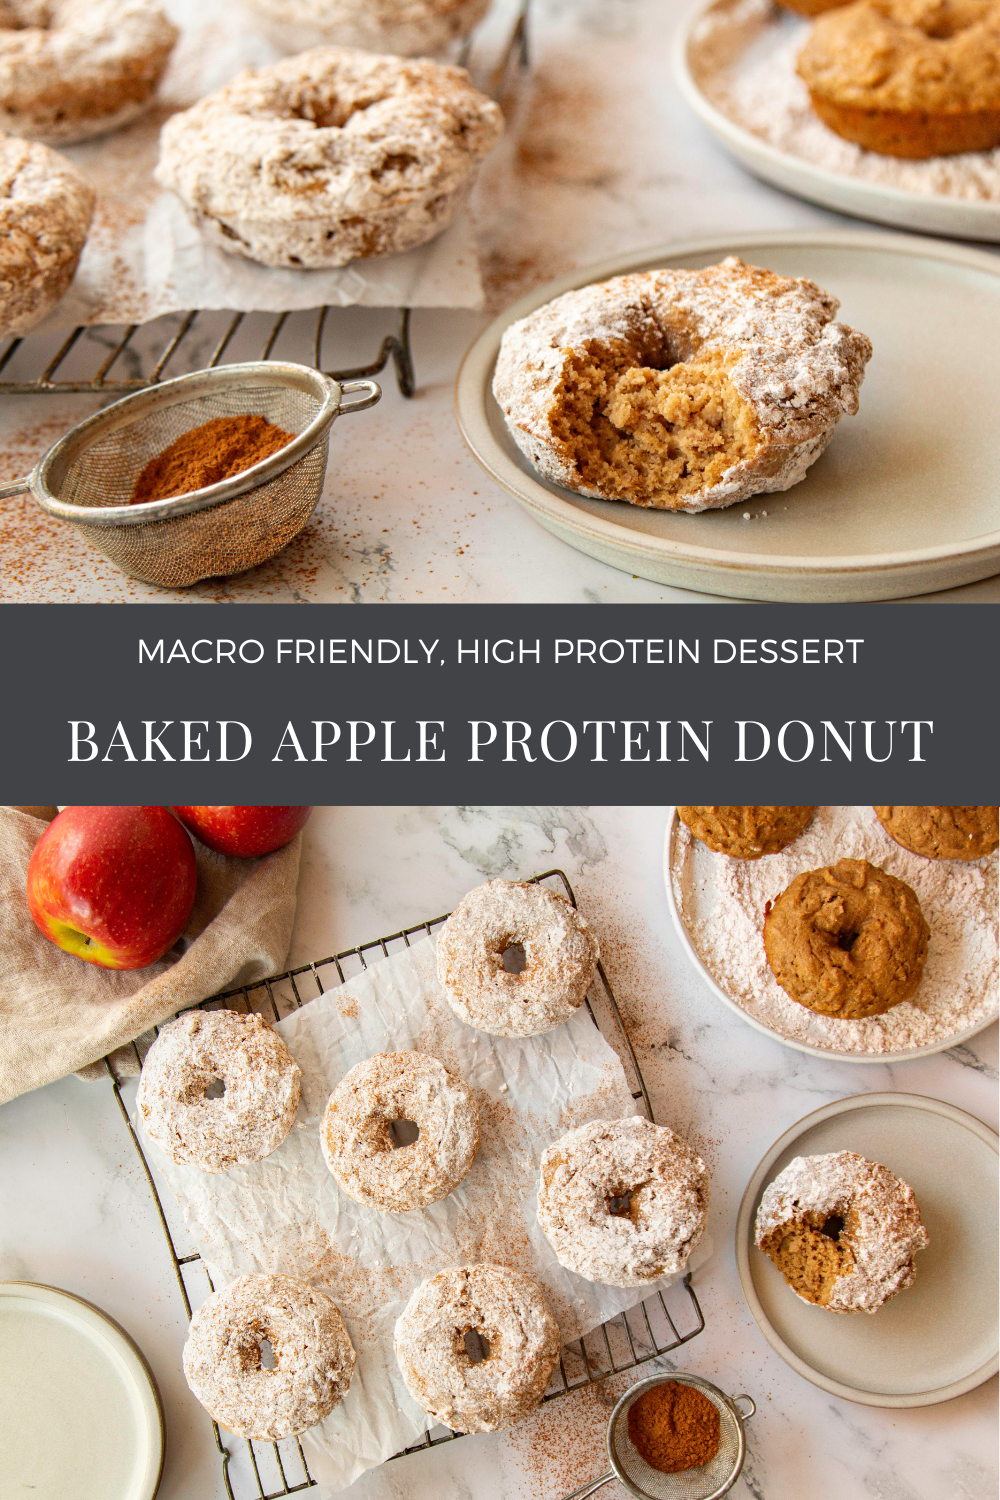 Baked Protein Donut Recipe